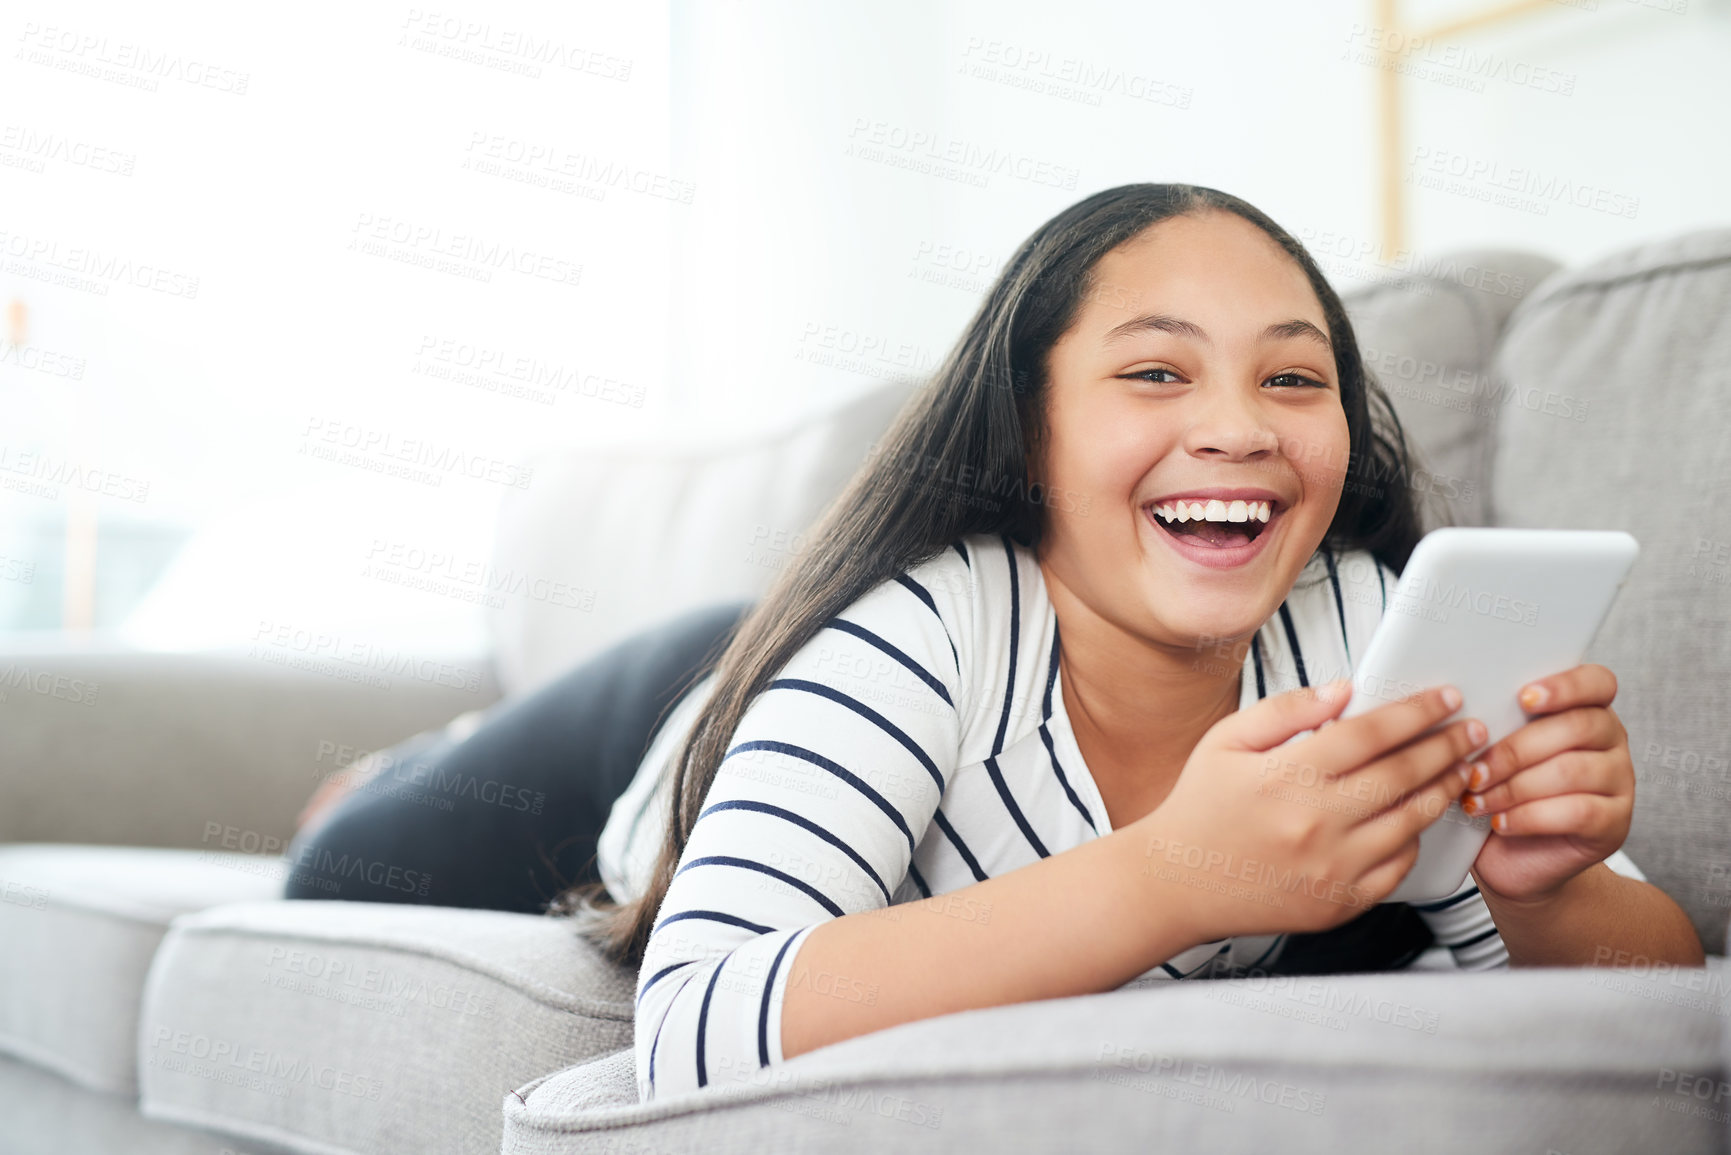 Buy stock photo Portrait of a happy young girl relaxing on the sofa and using a digital tablet